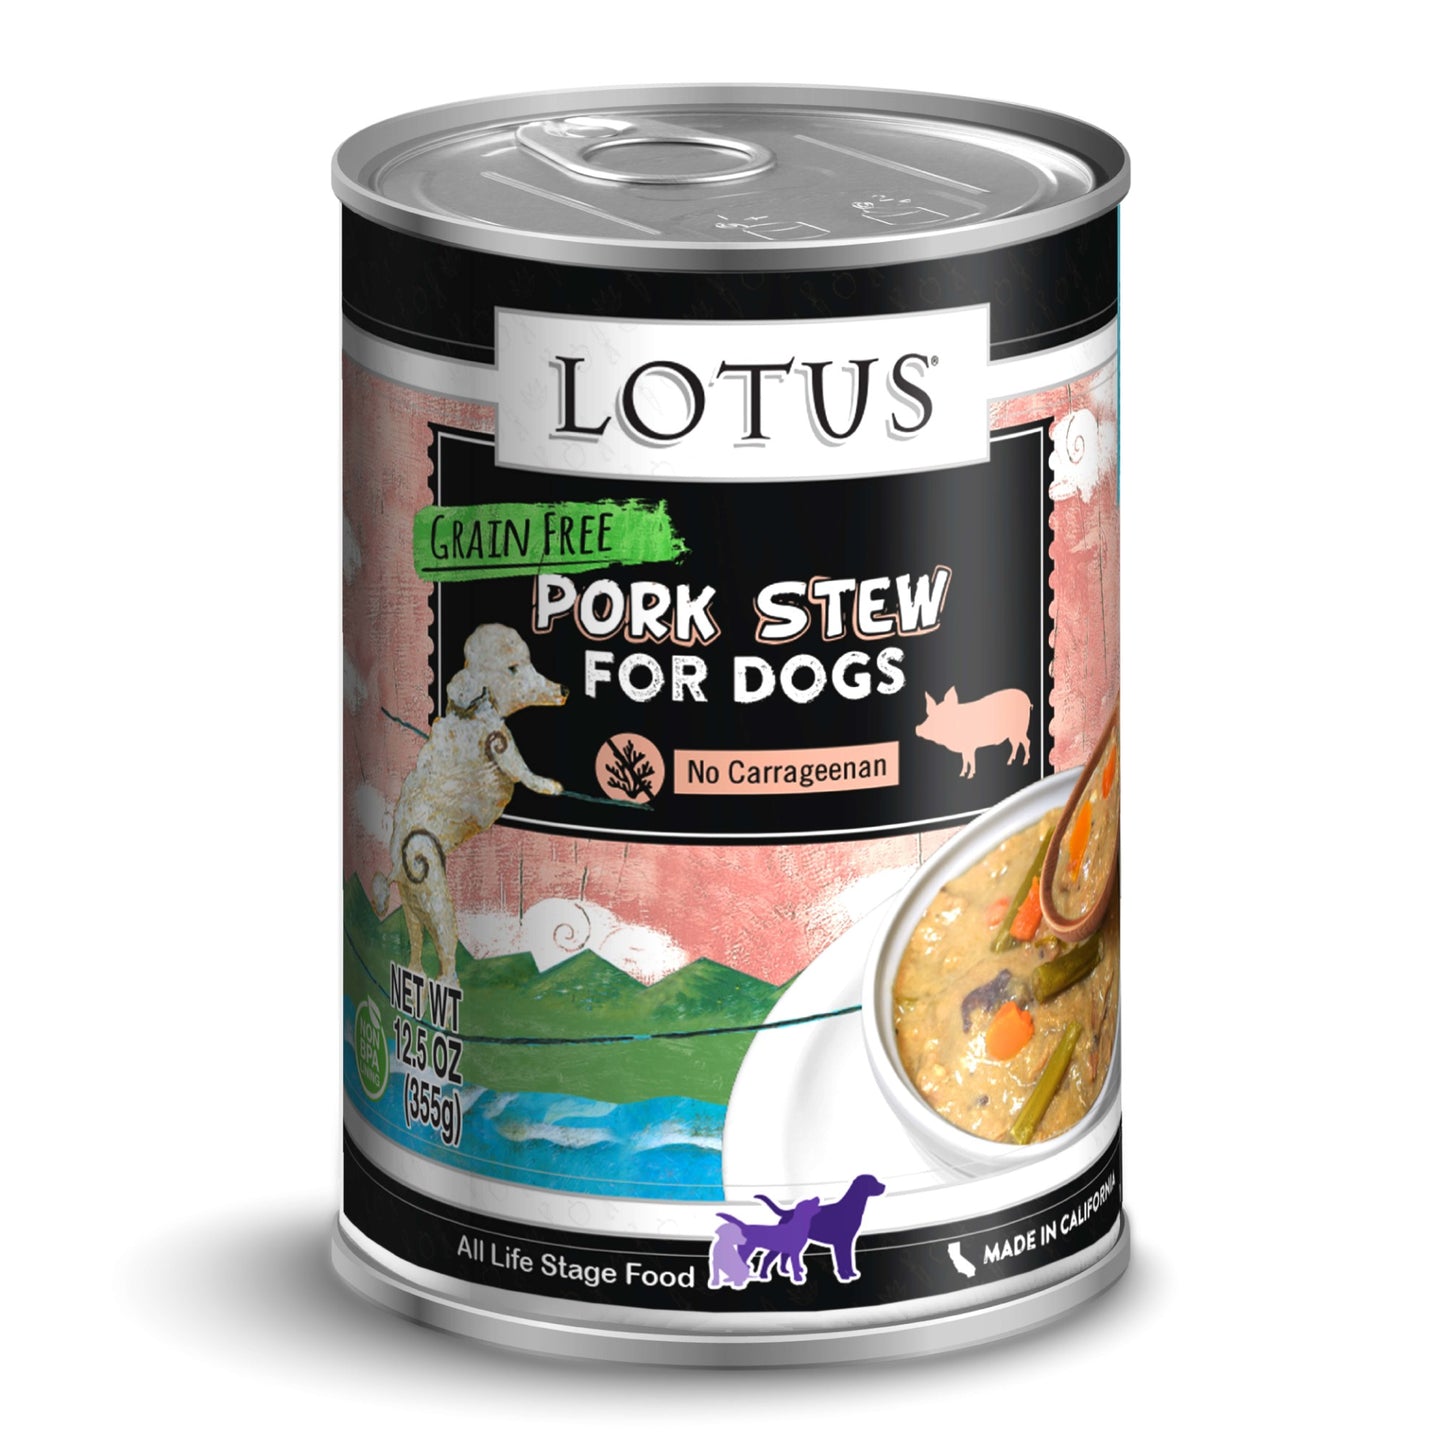 Lotus Grain Free Wholesome Pork Stew Canned Dog Food